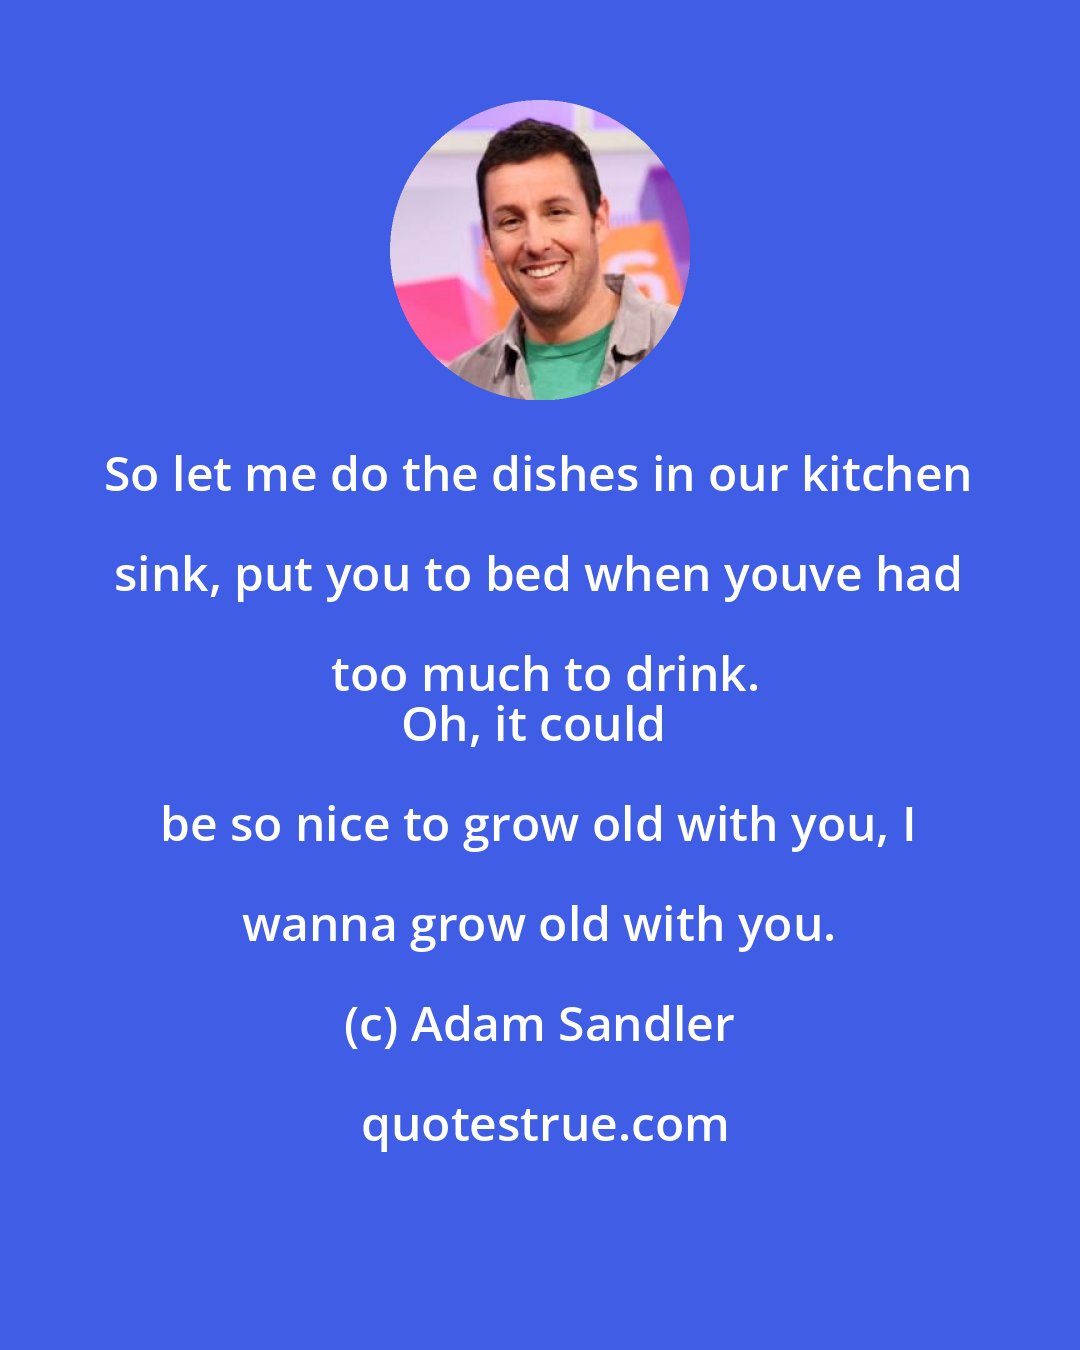 Adam Sandler: So let me do the dishes in our kitchen sink, put you to bed when youve had too much to drink.
Oh, it could be so nice to grow old with you, I wanna grow old with you.